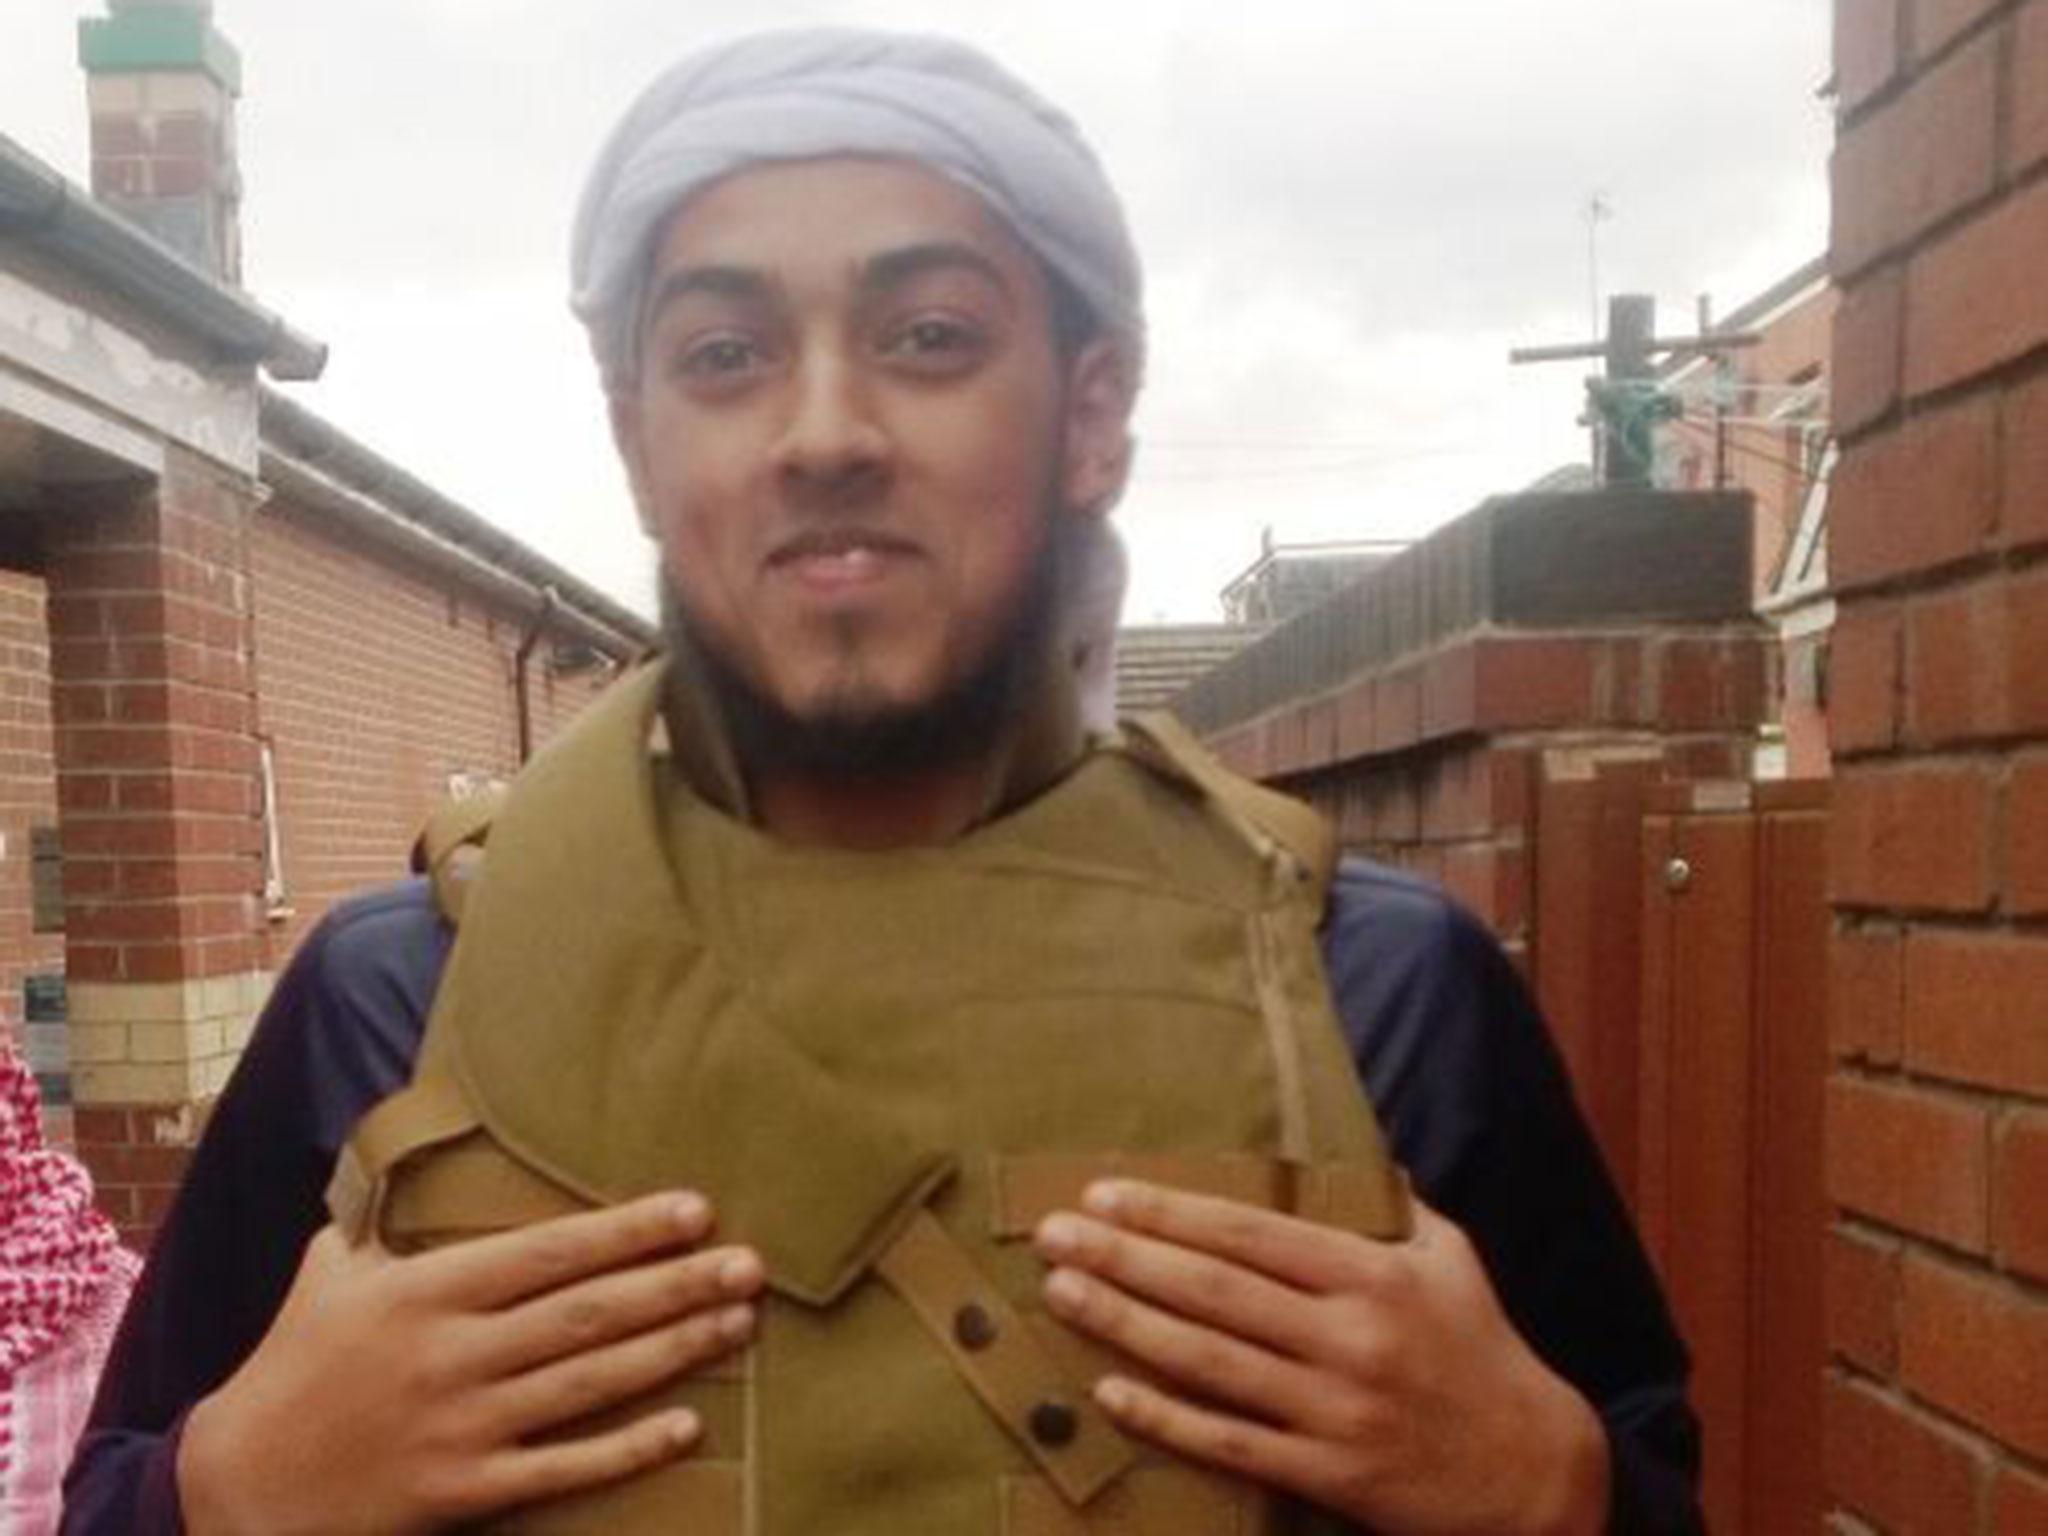 Undated handout file photo issued by Greater Manchester Police of Mohammed Syeedy, 21, who has been found guilty by a jury at Manchester Crown Court of the murder of Rochdale imam Jalal Uddin, 71